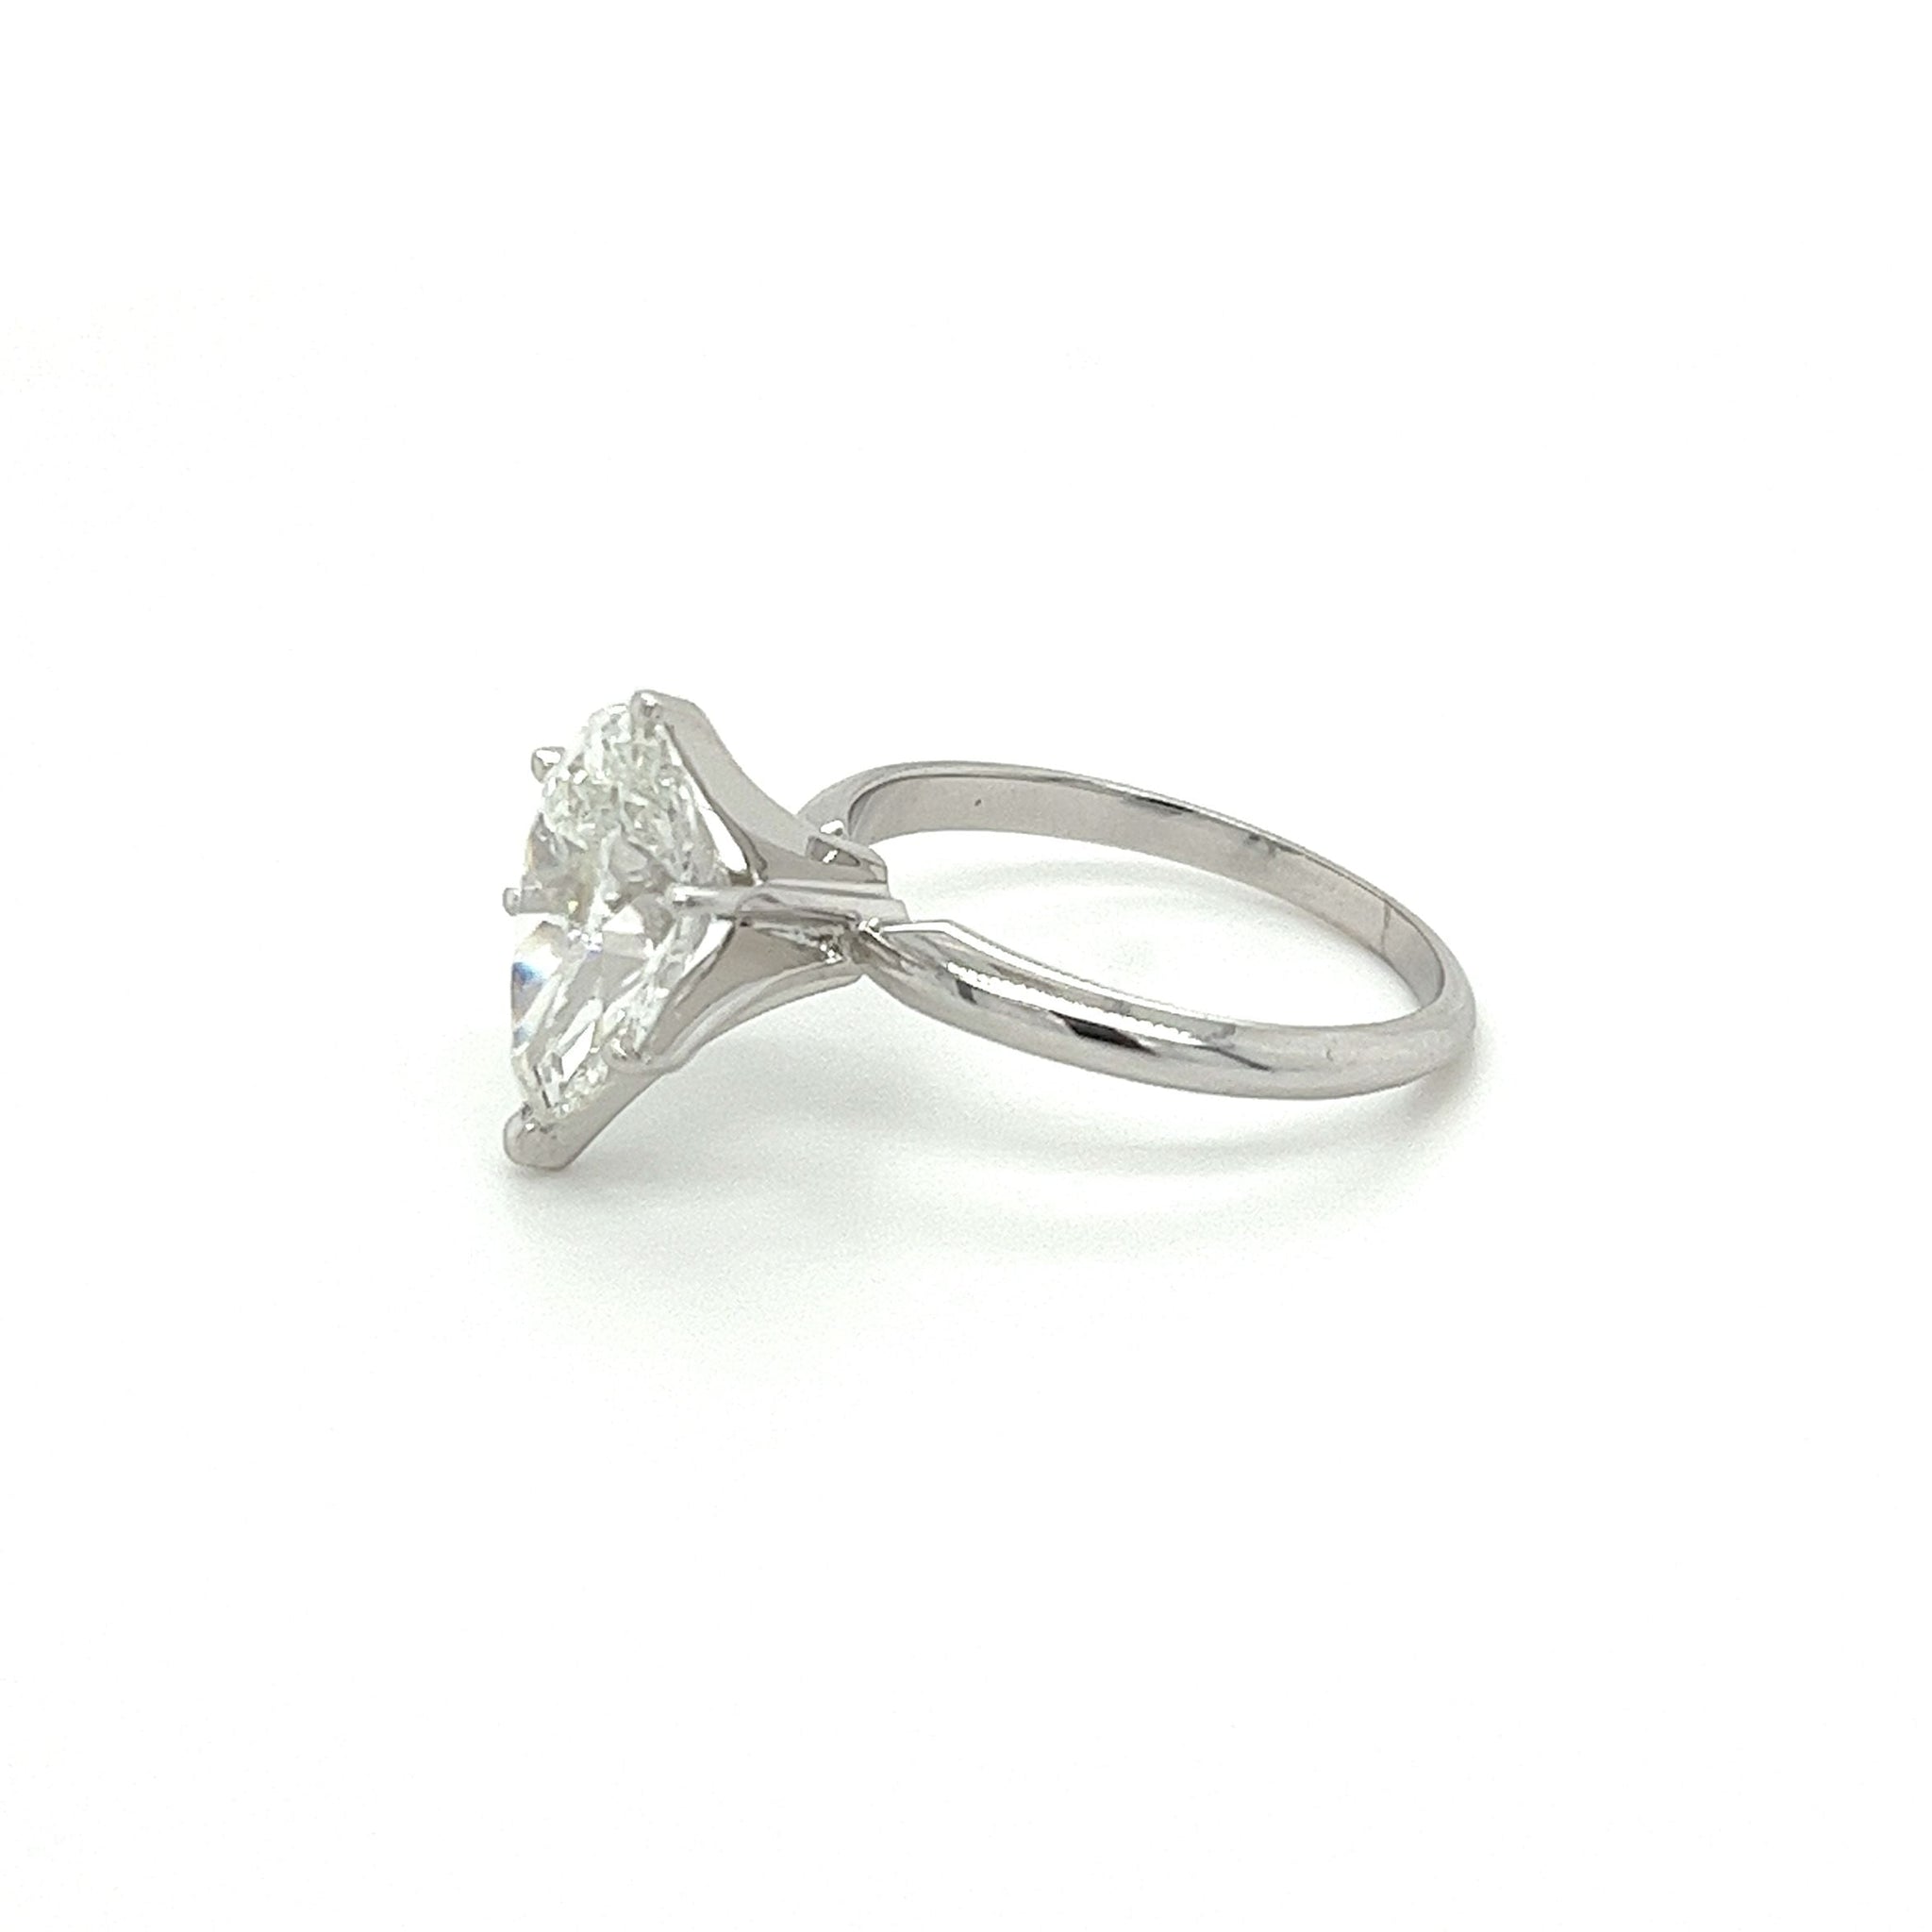 IGI Certified 3.01 Carat Pear Shape Lab Grown Diamond Solitaire Engagement Ring in 14k White Gold